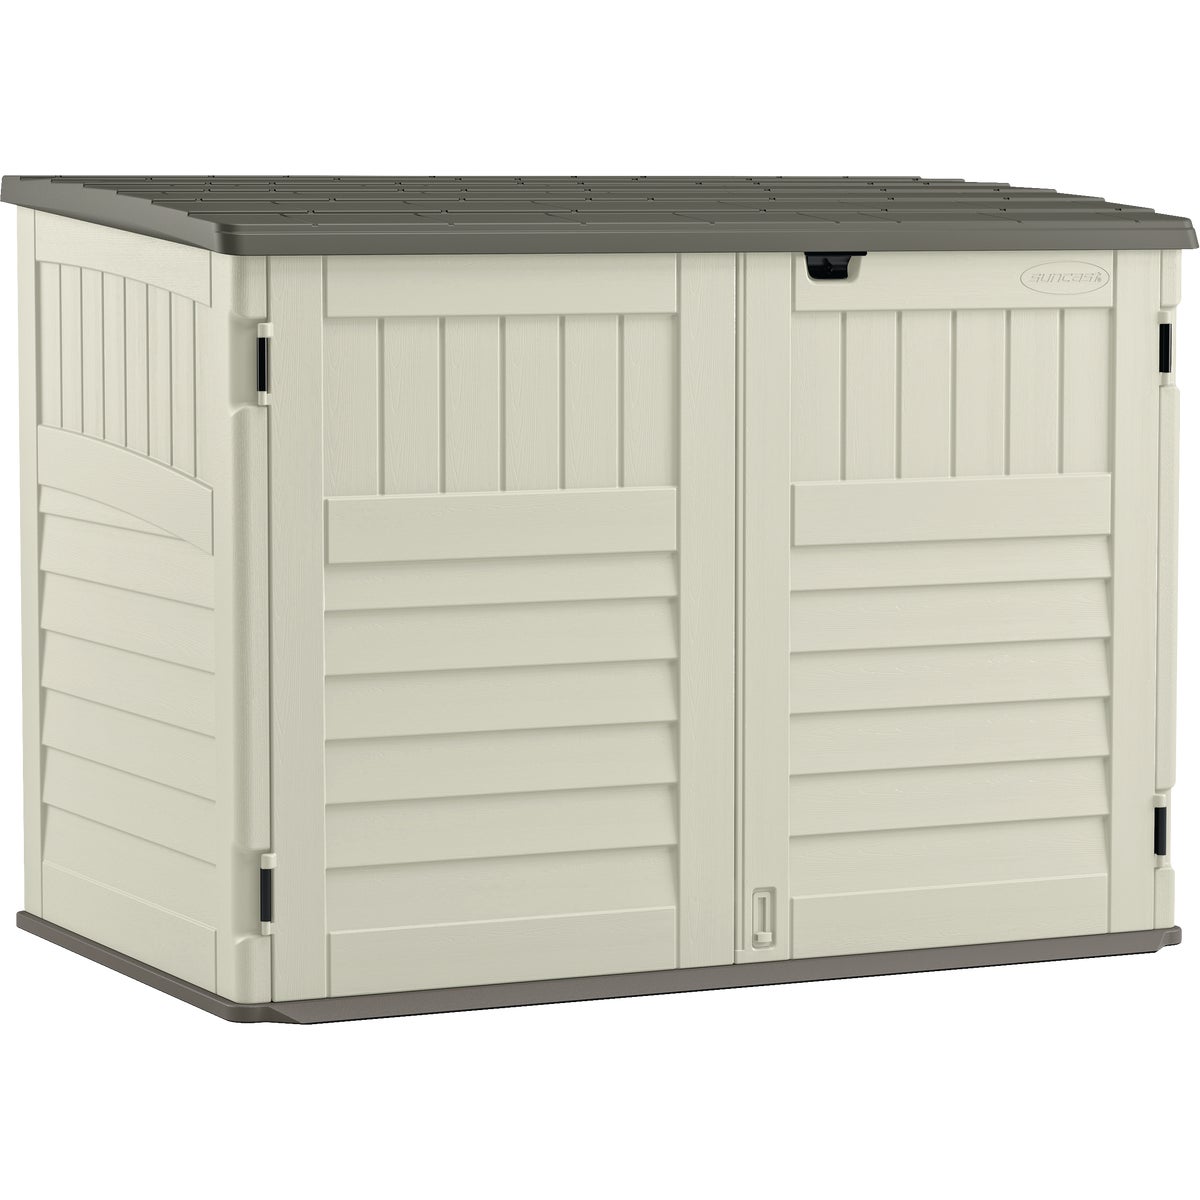 Item 159387, The Stow-Away Horizontal Shed is perfect for storing garbage cans and 